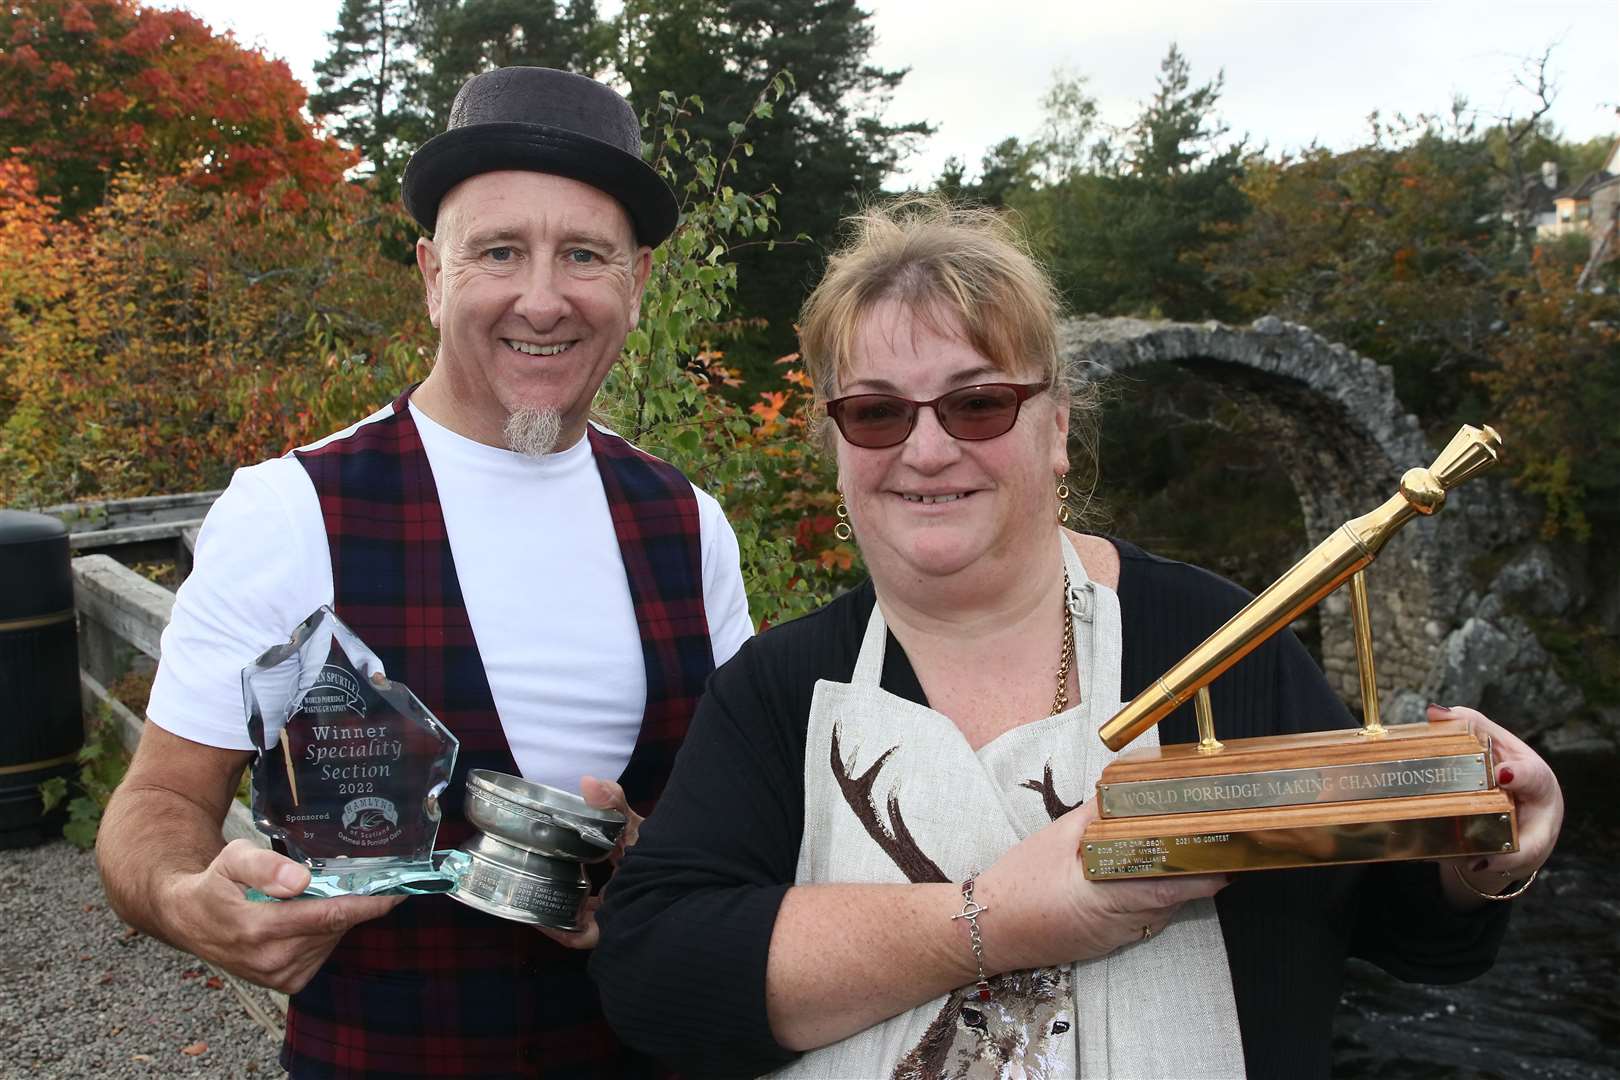 World porridge-making champions for 2022 Chris Young and Lisa Williams pose with their trophies in front of Carrbridge's famous bridge.